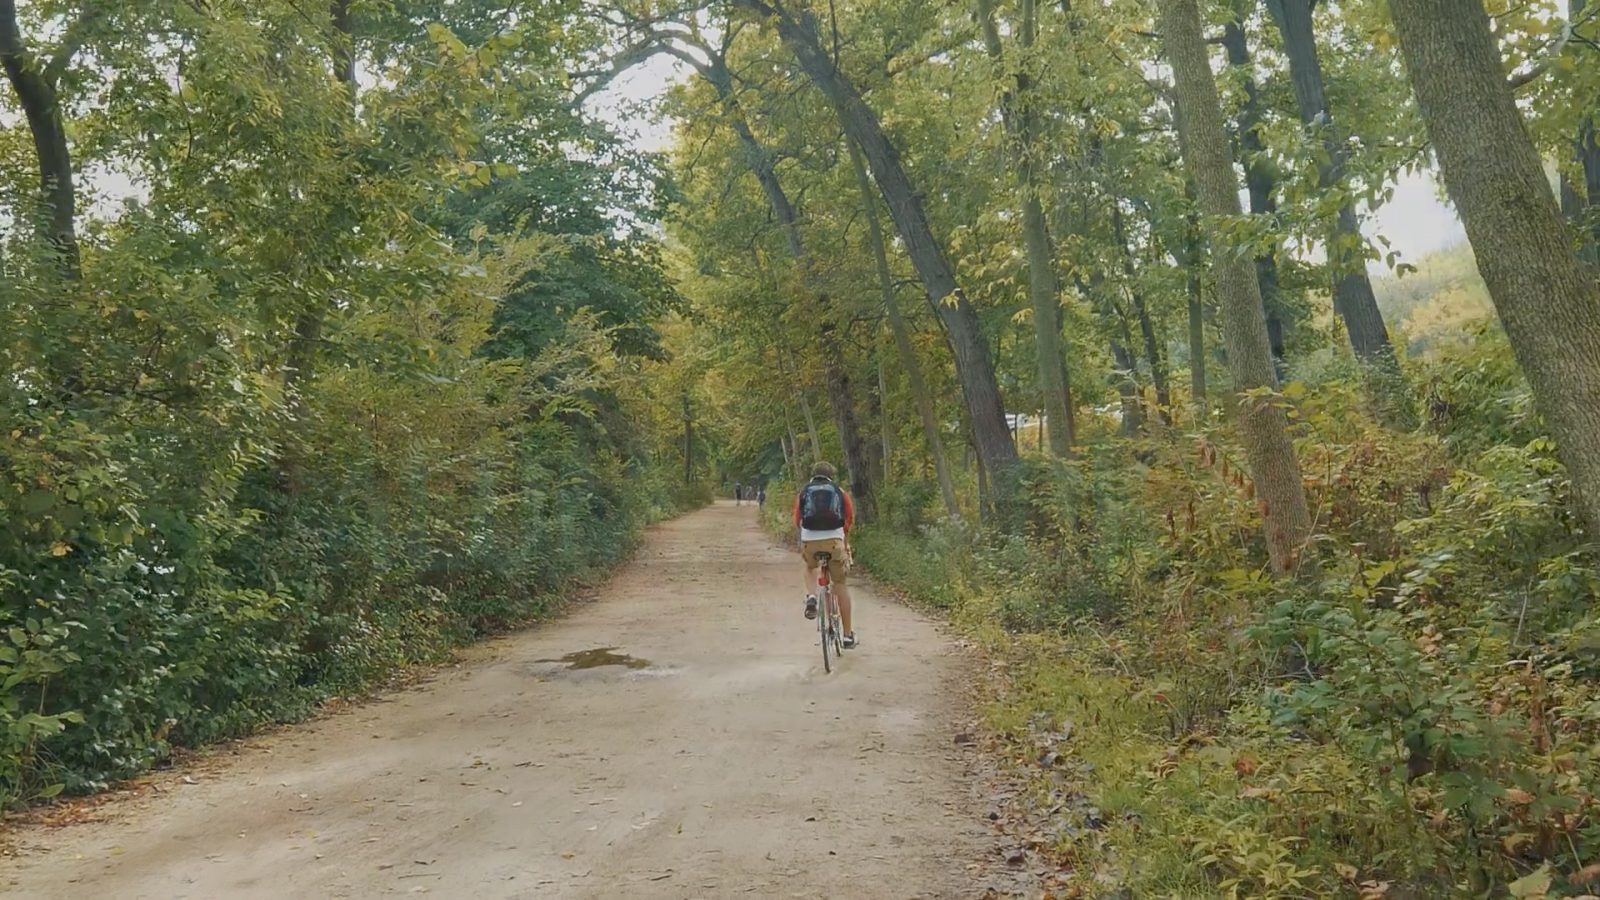 A bicyclist is seen riding away from the camera into a dense forest path.